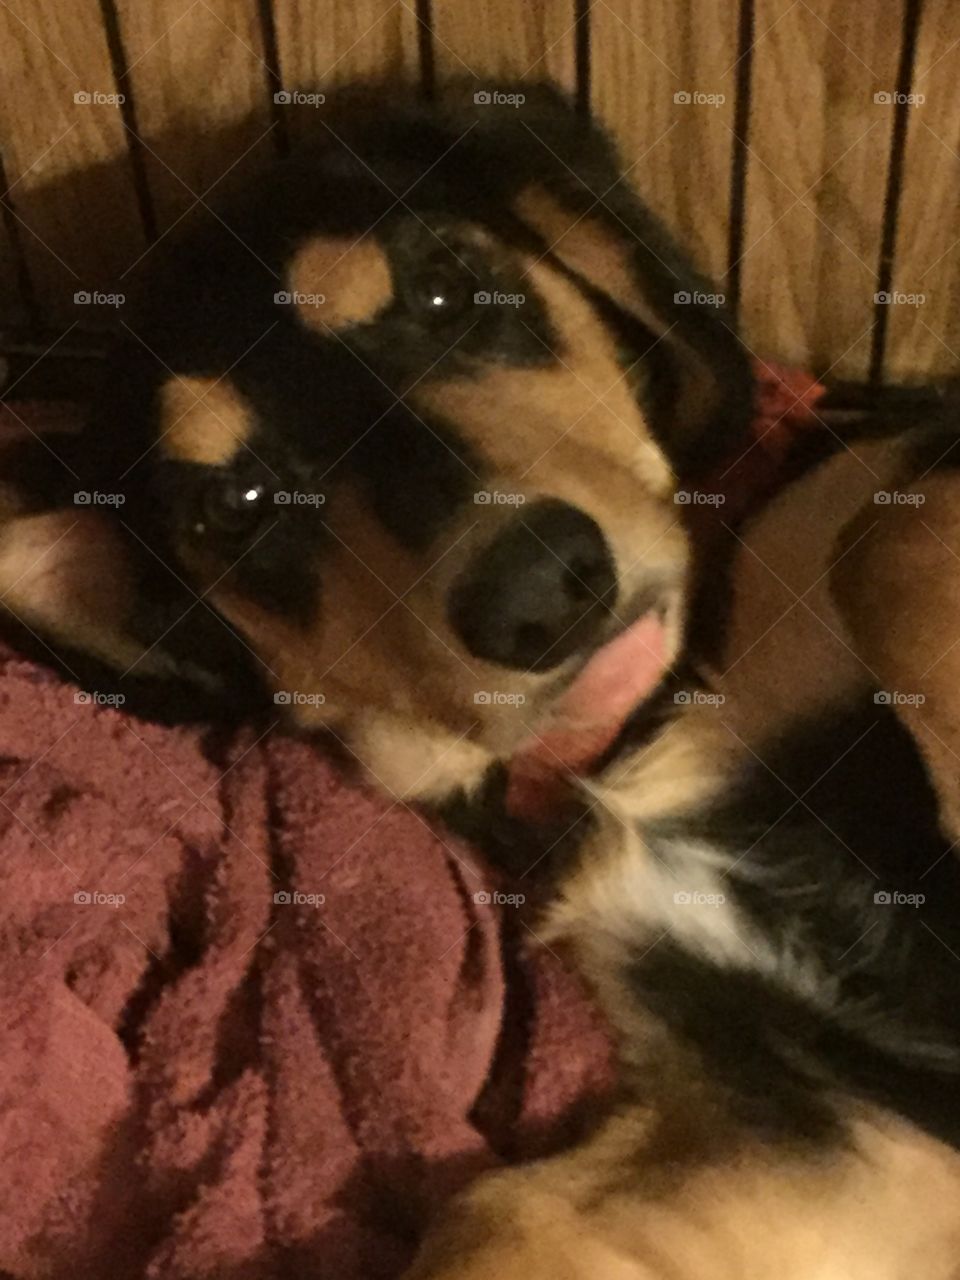 Silly puppy always has his tongue peeking out!